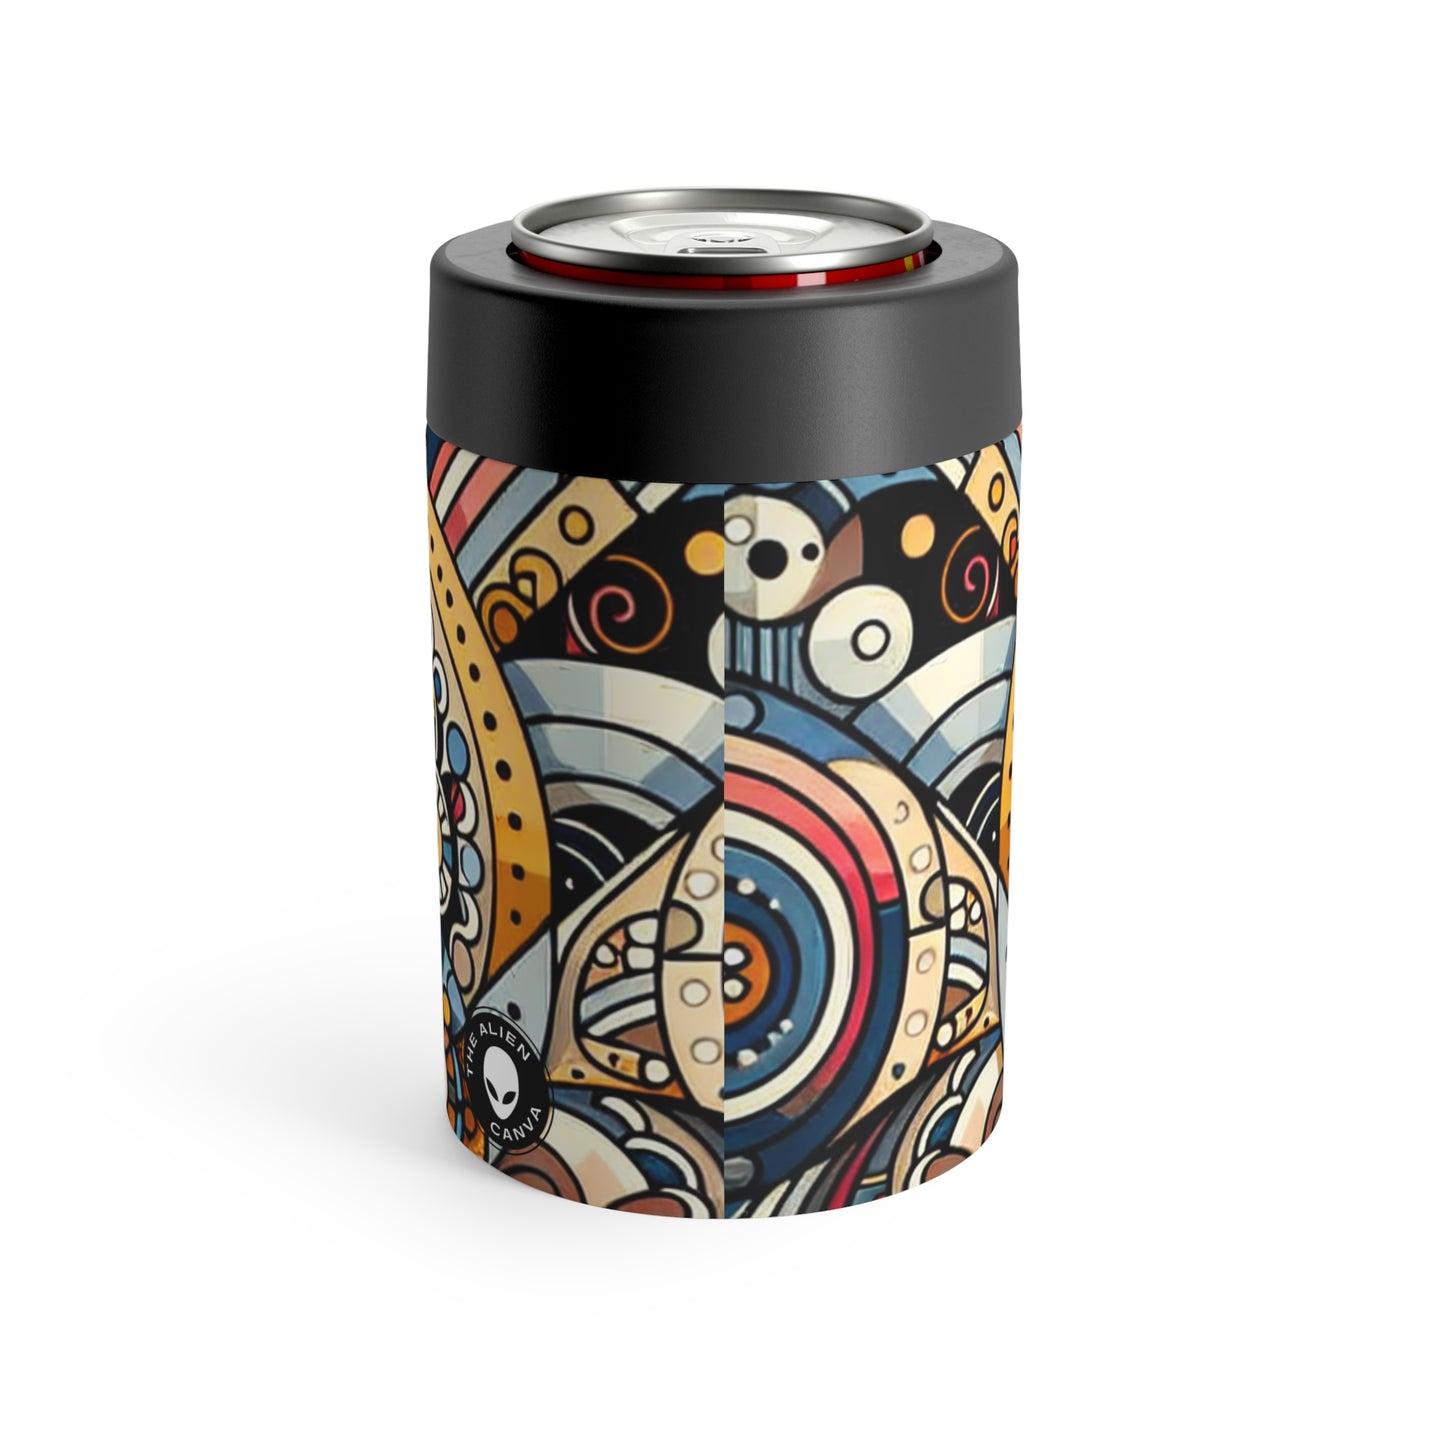 "Moroccan Mosaic Masterpiece" - The Alien Can Holder Pattern Art